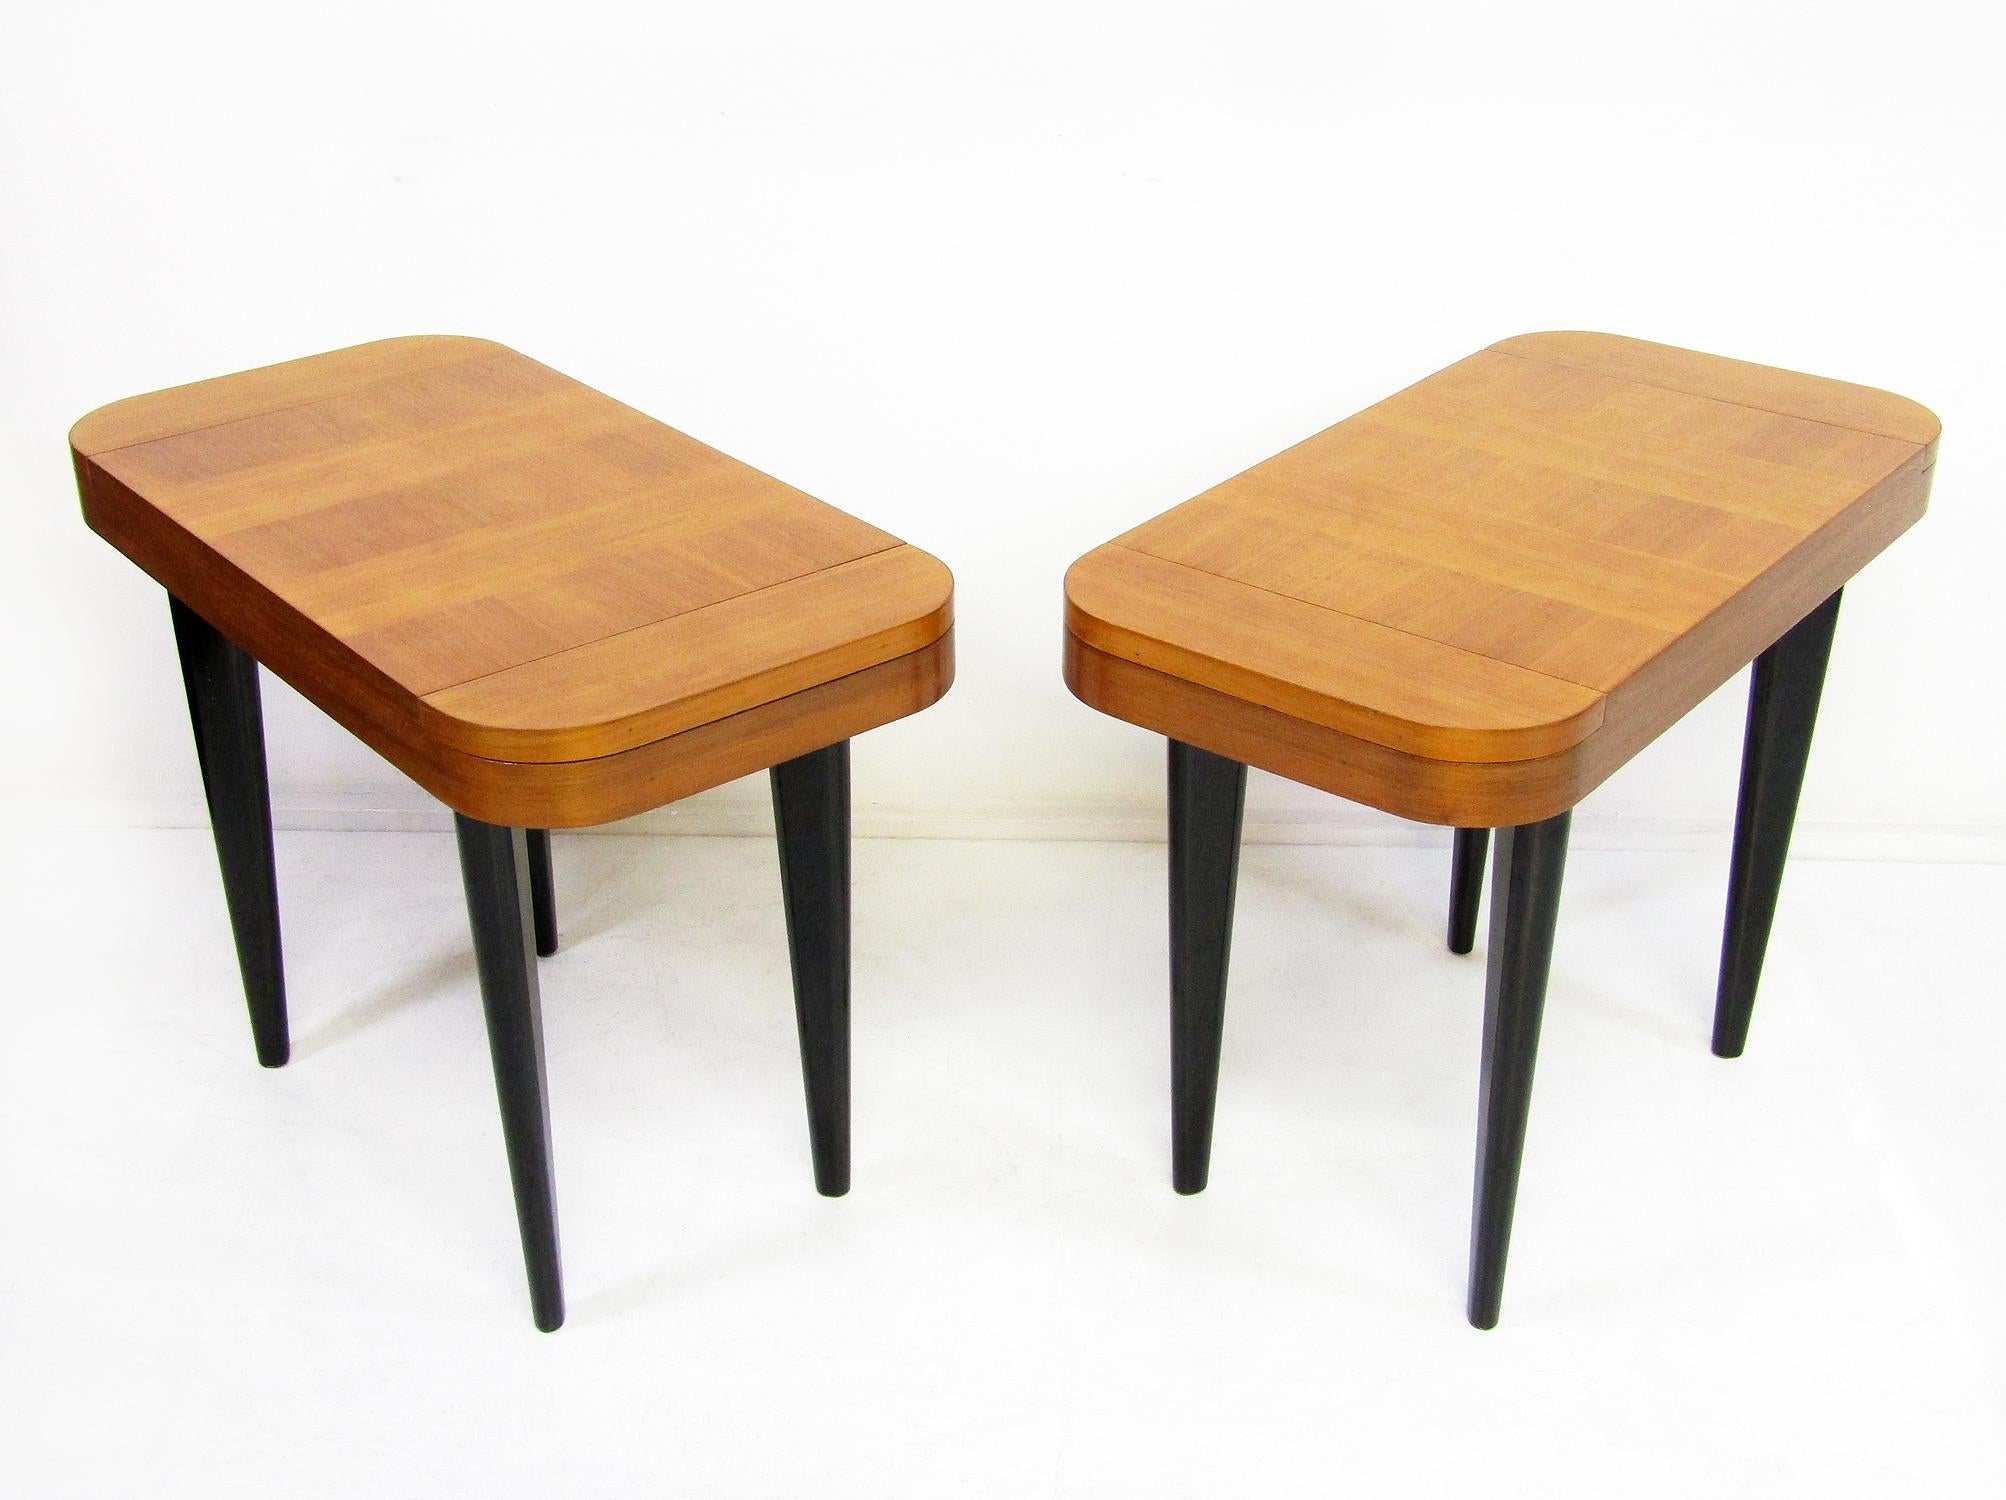 A pair of Art Deco end tables or nightstands by Gilbert Rohde for Herman Miller, circa 1940.

Made from striking cross-banded Paldao wood on ebonised legs, each table has two discretely lidded storage compartments for jewellery or other small